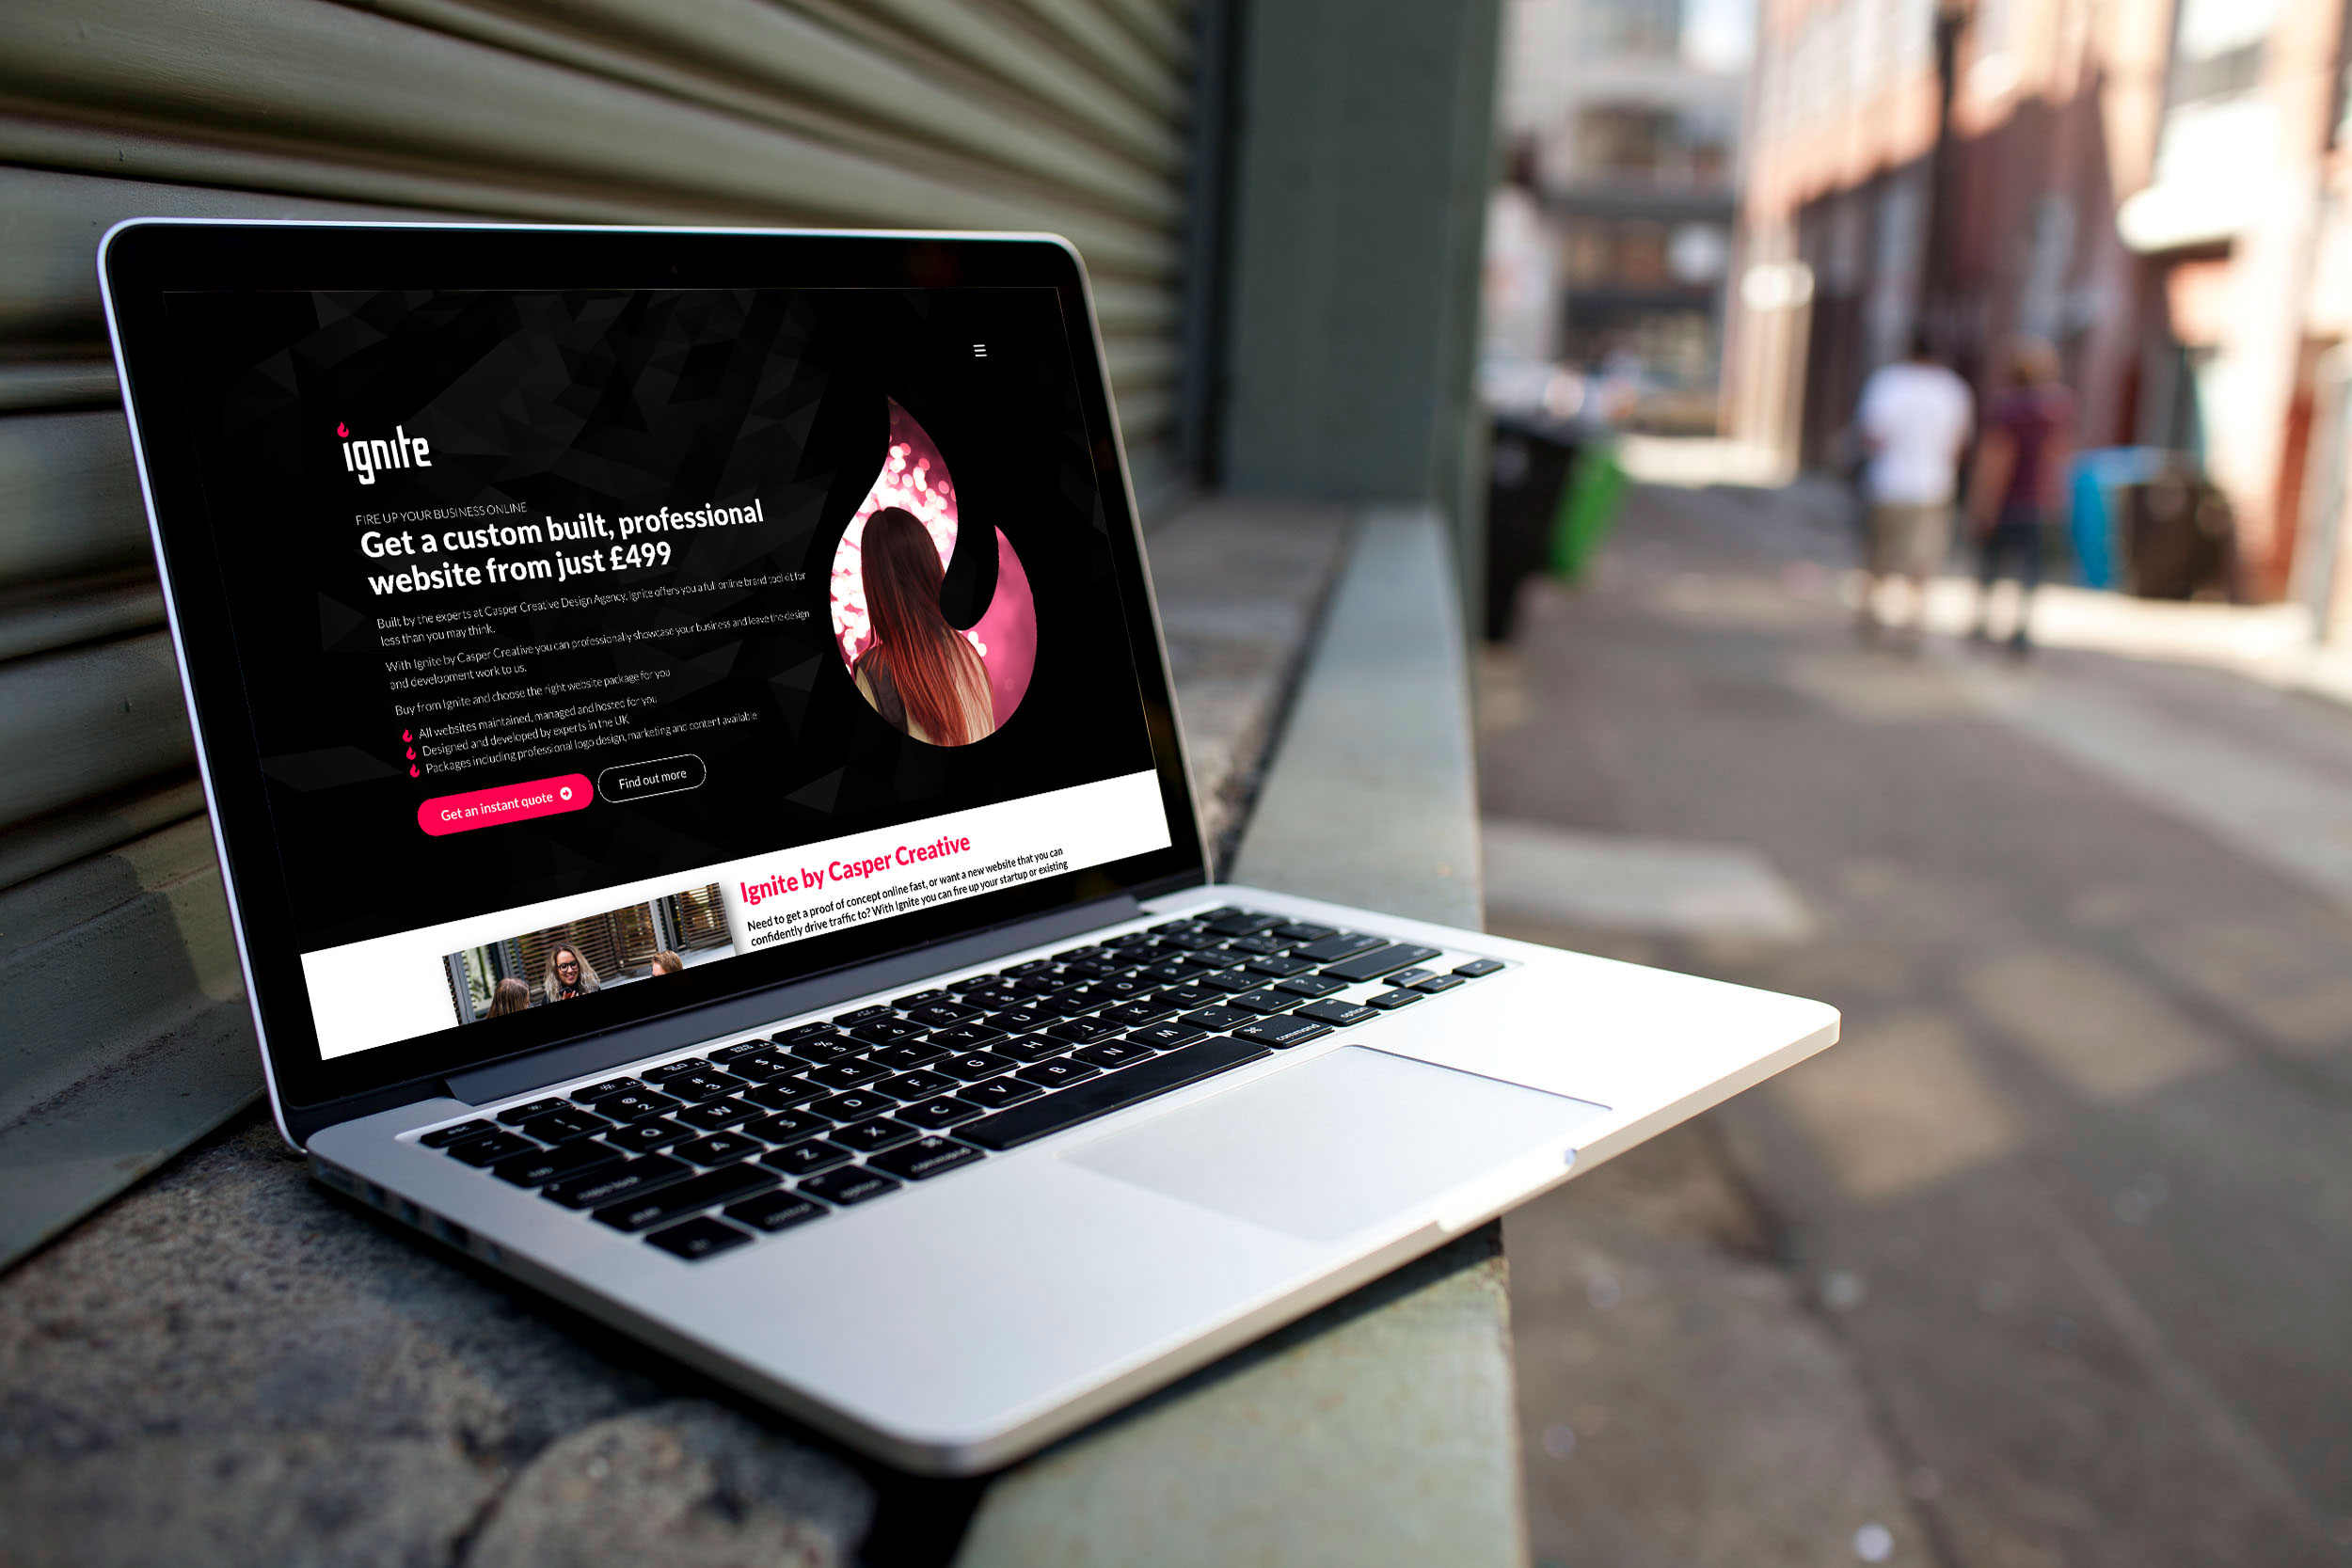 Design agency introduces new website product designed for start-ups and entrepreneurs at home